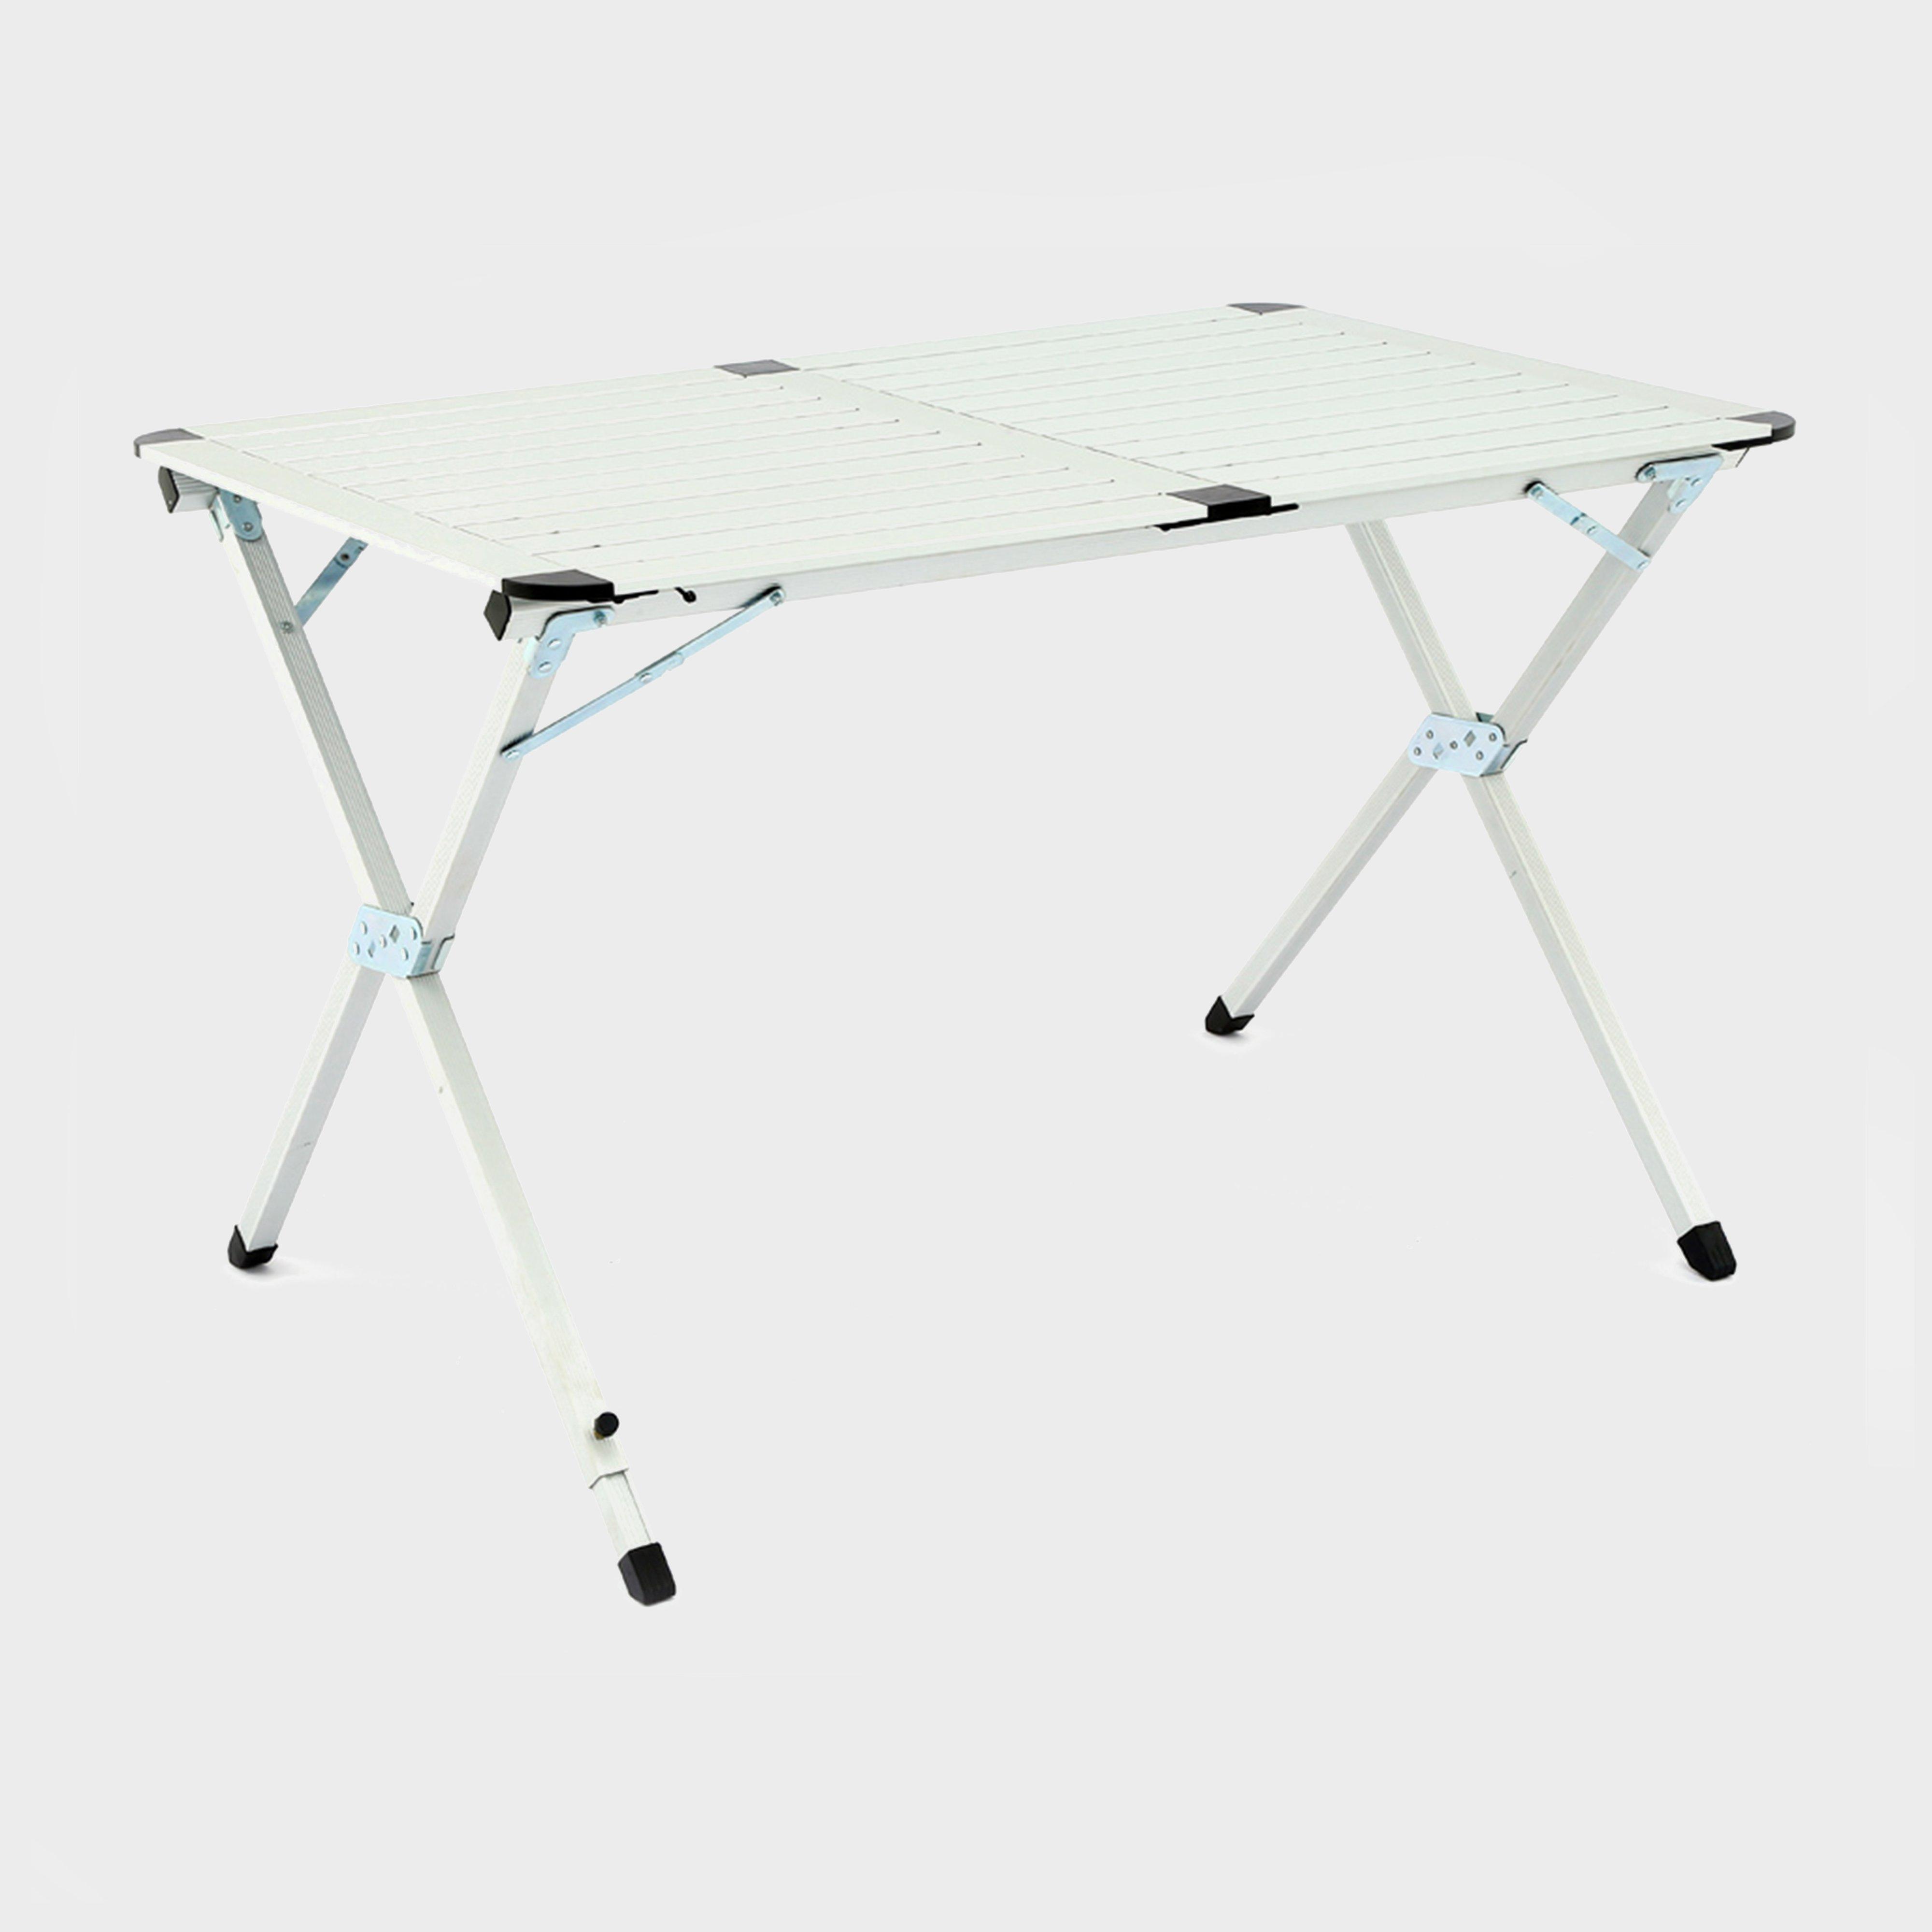 Hi-gear Elite Double Table - Silver/table  Silver/table